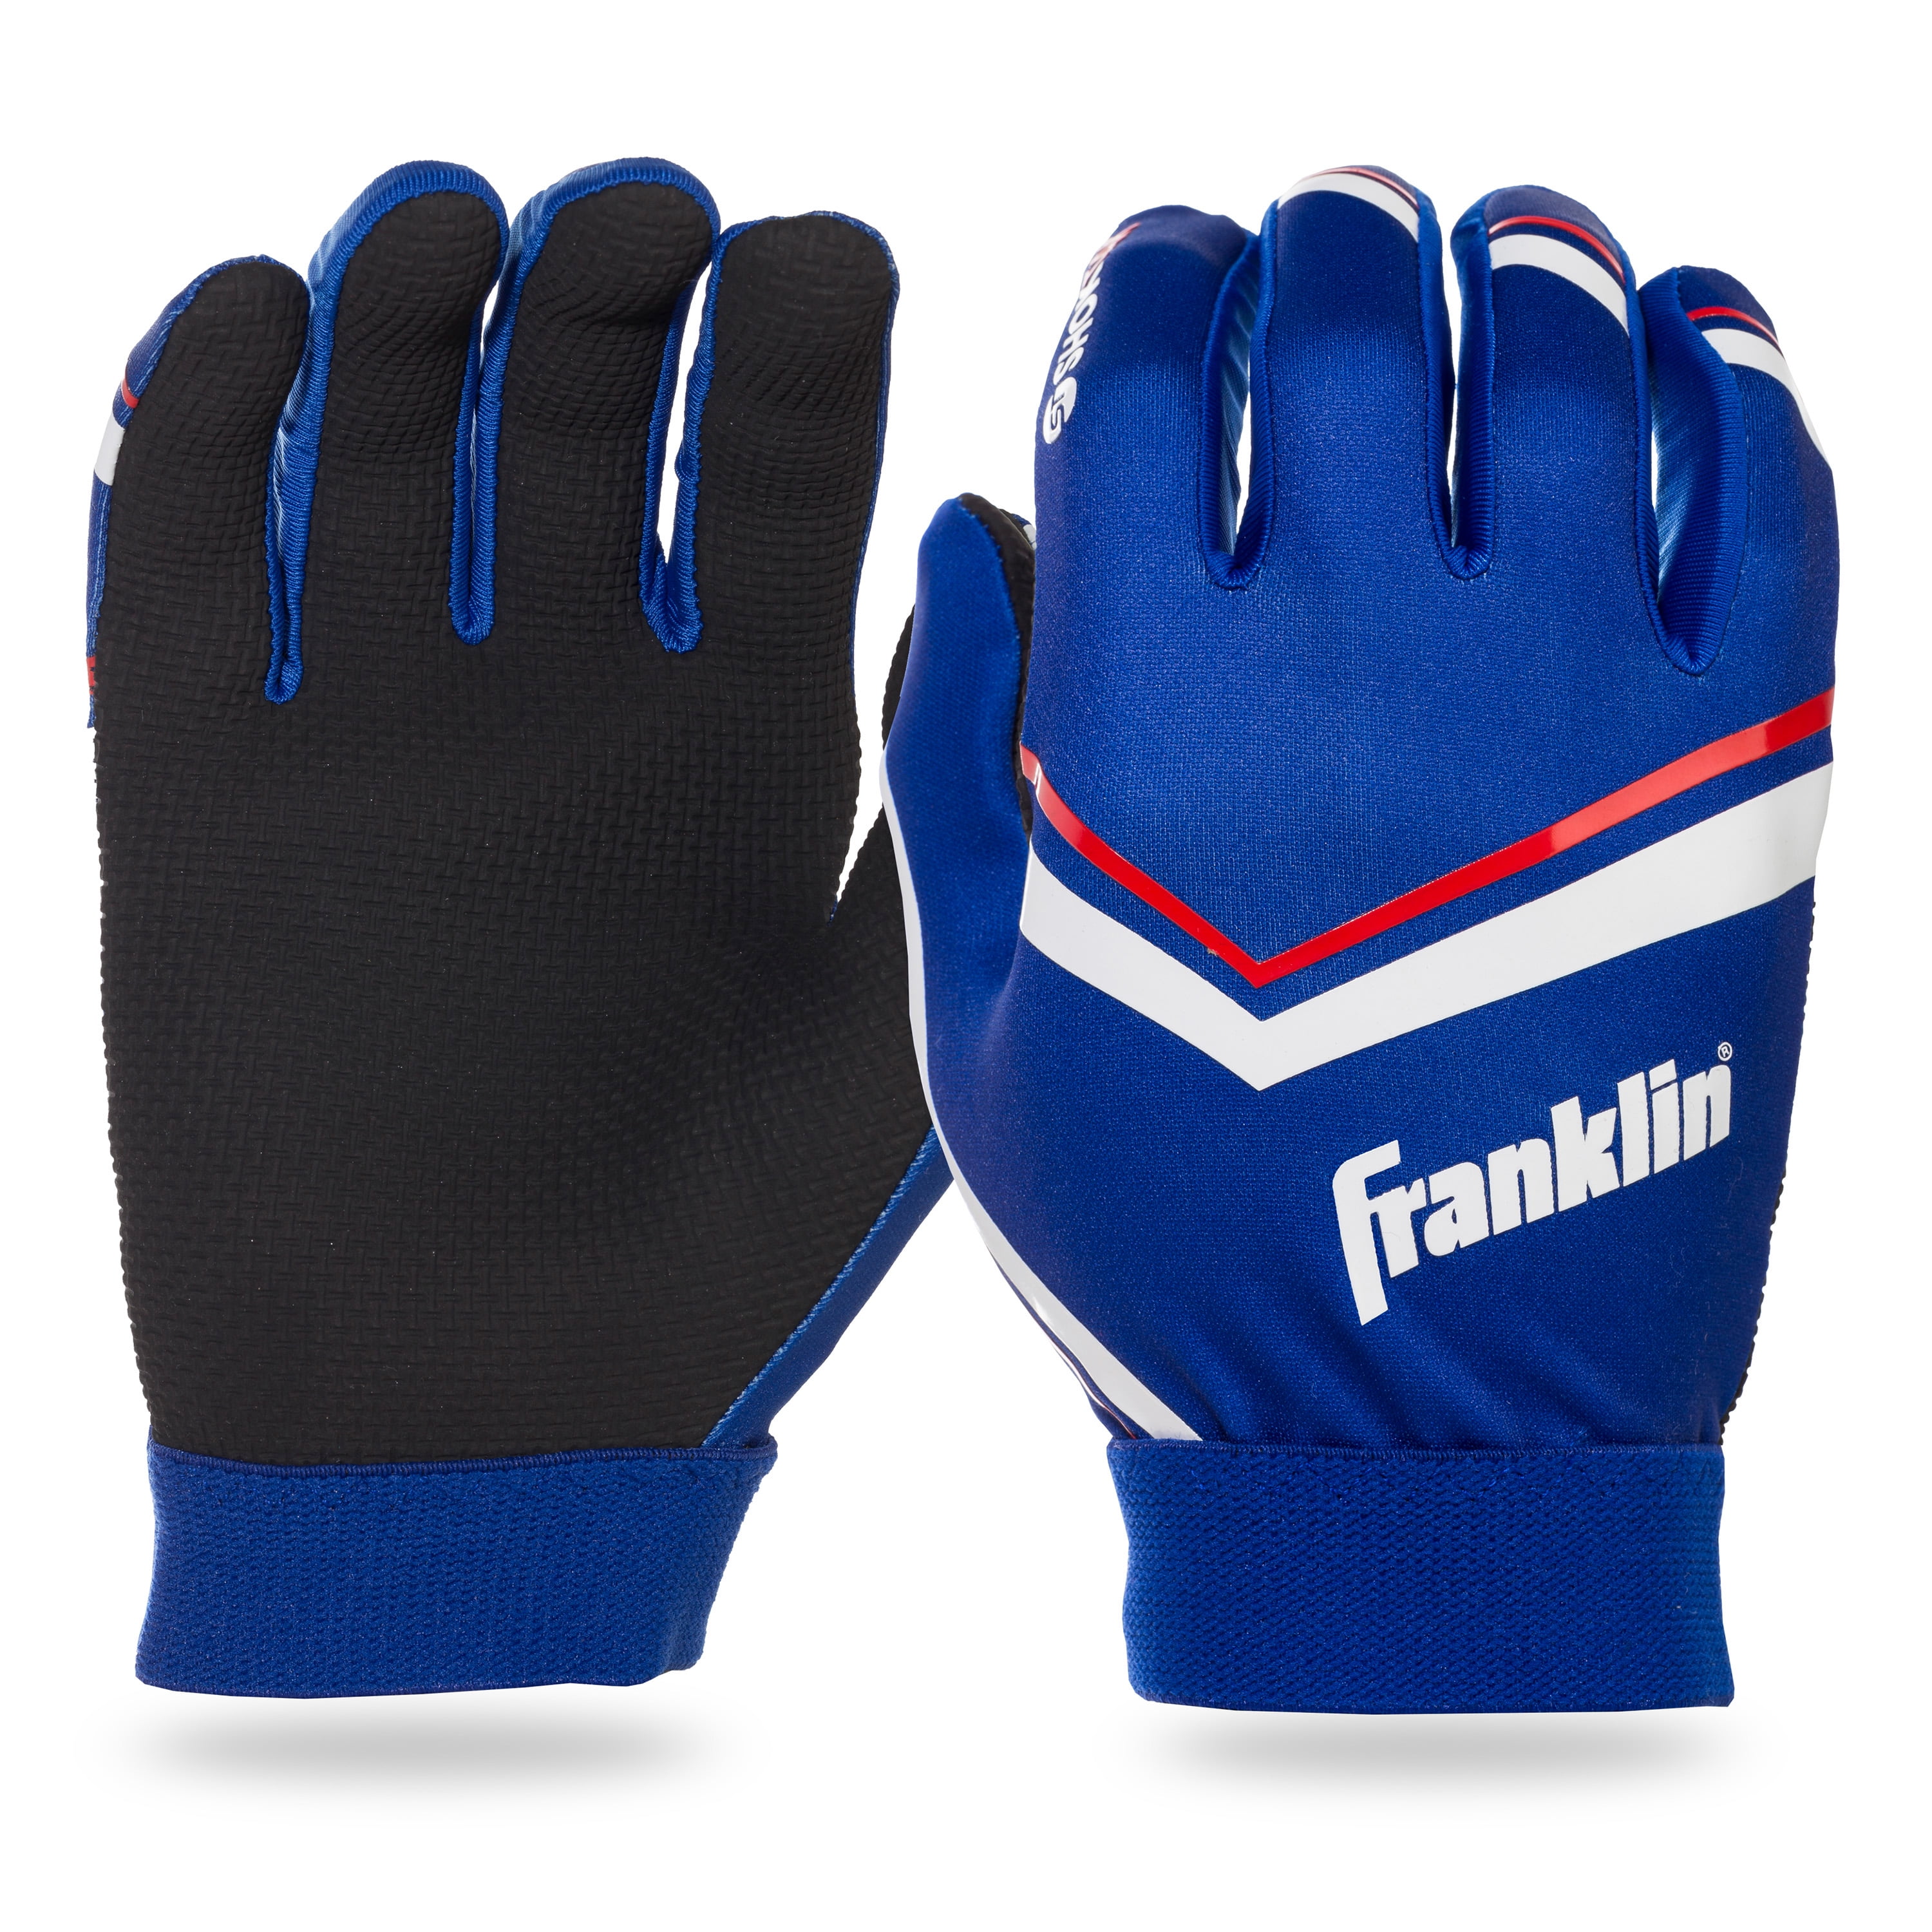 Franklin Sports Youth Football Receiver Gloves - Shoktak Youth Gloves -  Kids Football Gloves - High Grip Football Gloves - Royal - Youth Large